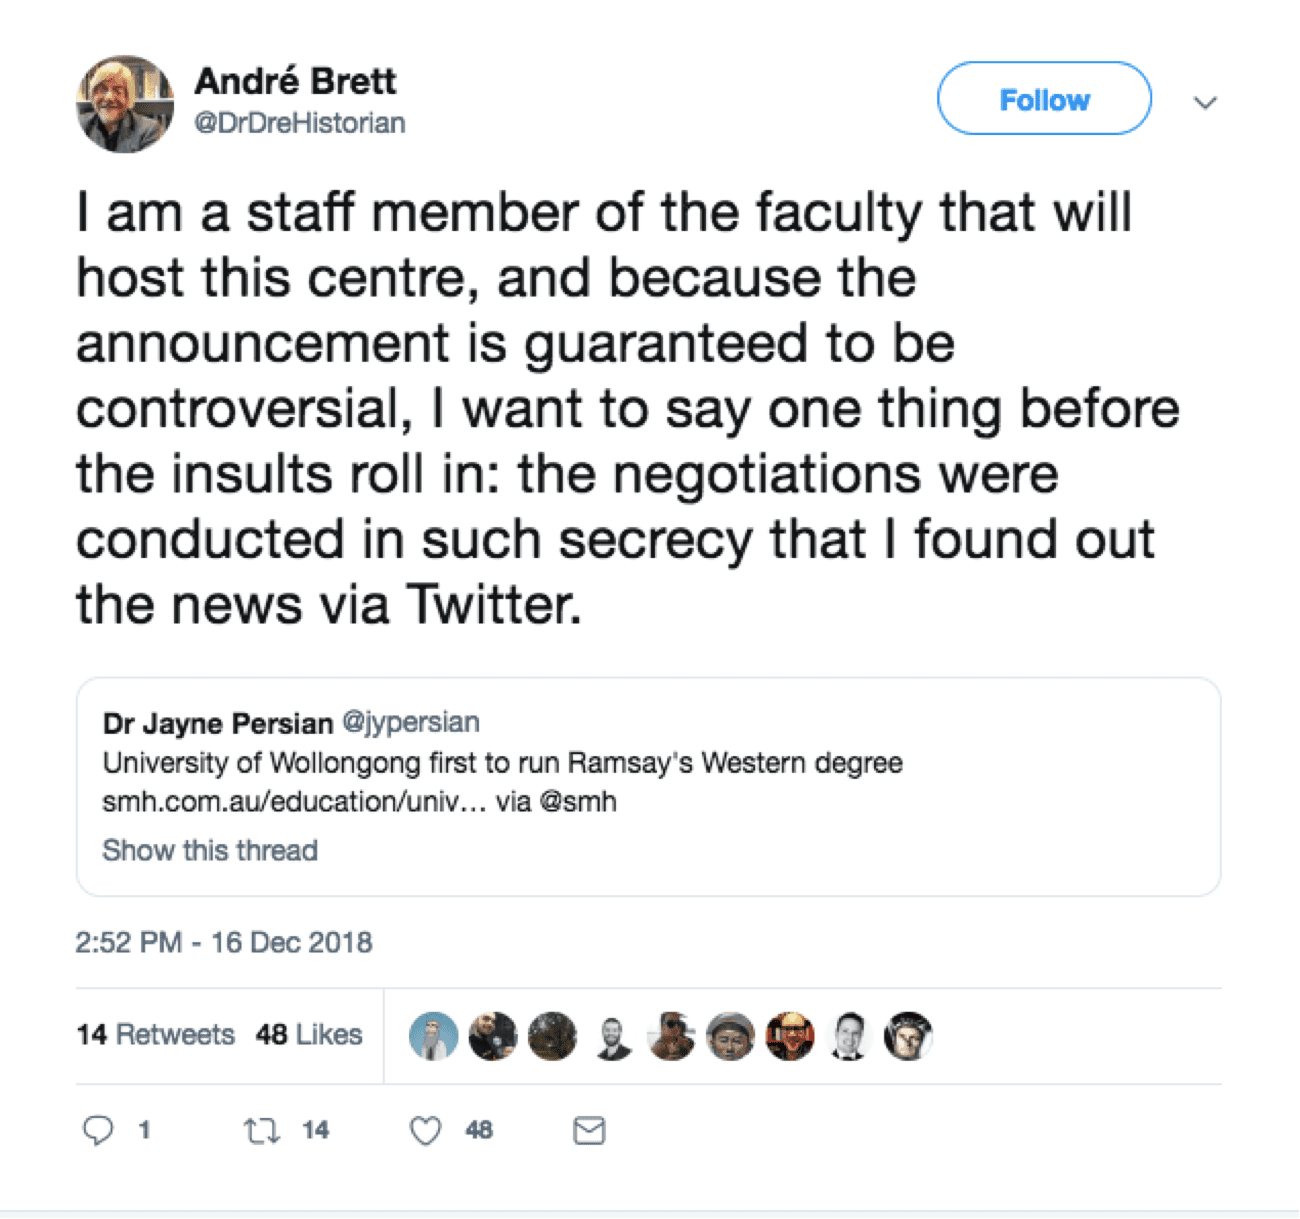 Dr Andre Brett's tweet: "I am a staff member of the faculty that will host this centre, and because the announcement is guaranteed to be controversial, i want to say one thing before the insults roll in: the negotiations were conducted in such secrecy that I found out the news via Twitter."